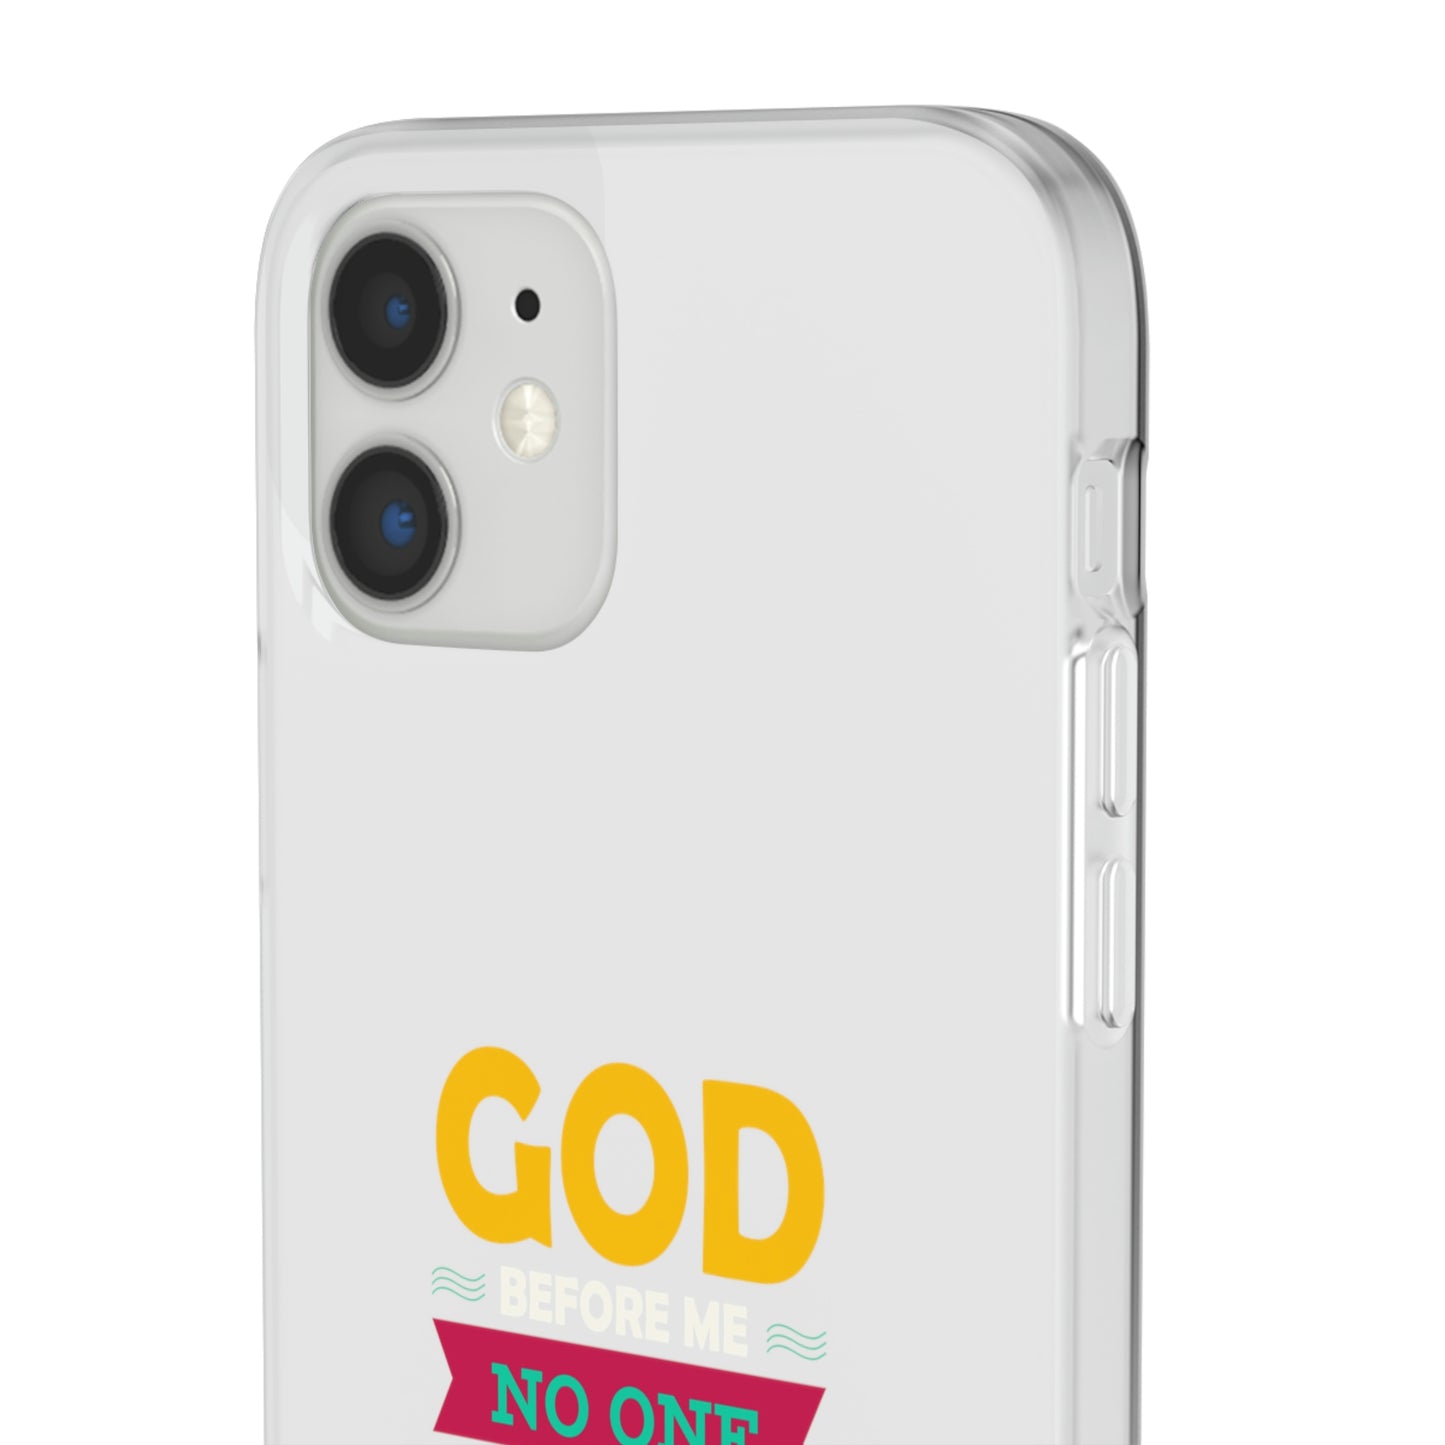 God Before Me No One & Nothing Can Stop Me Flexi Phone Case